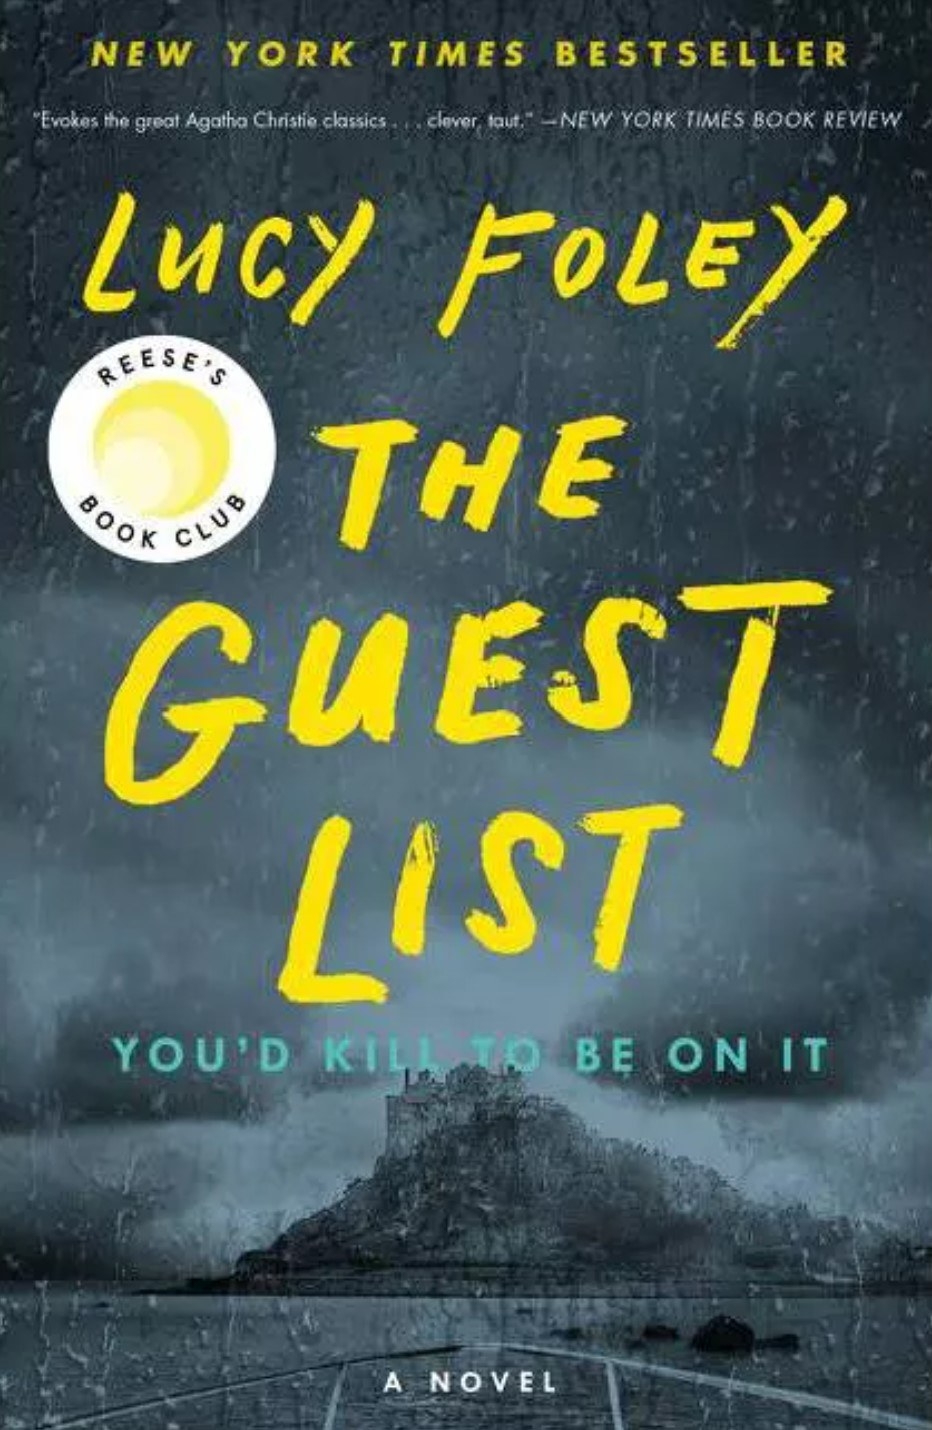 The cover of The Guest List by Lucy Foley